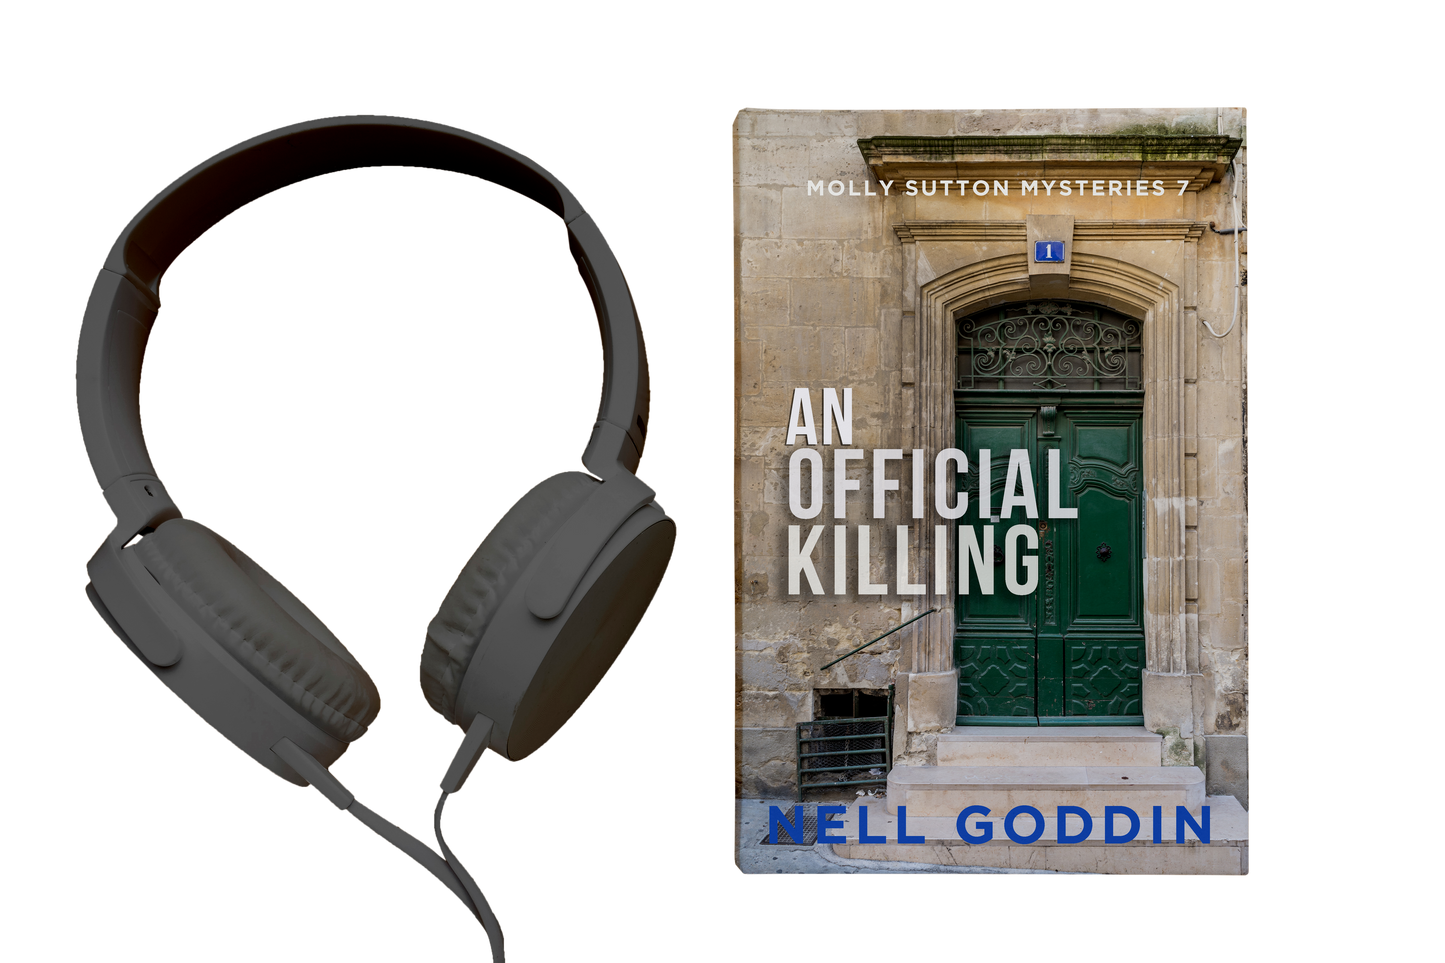 An Official Killing (Molly Sutton Mysteries 7): Audio